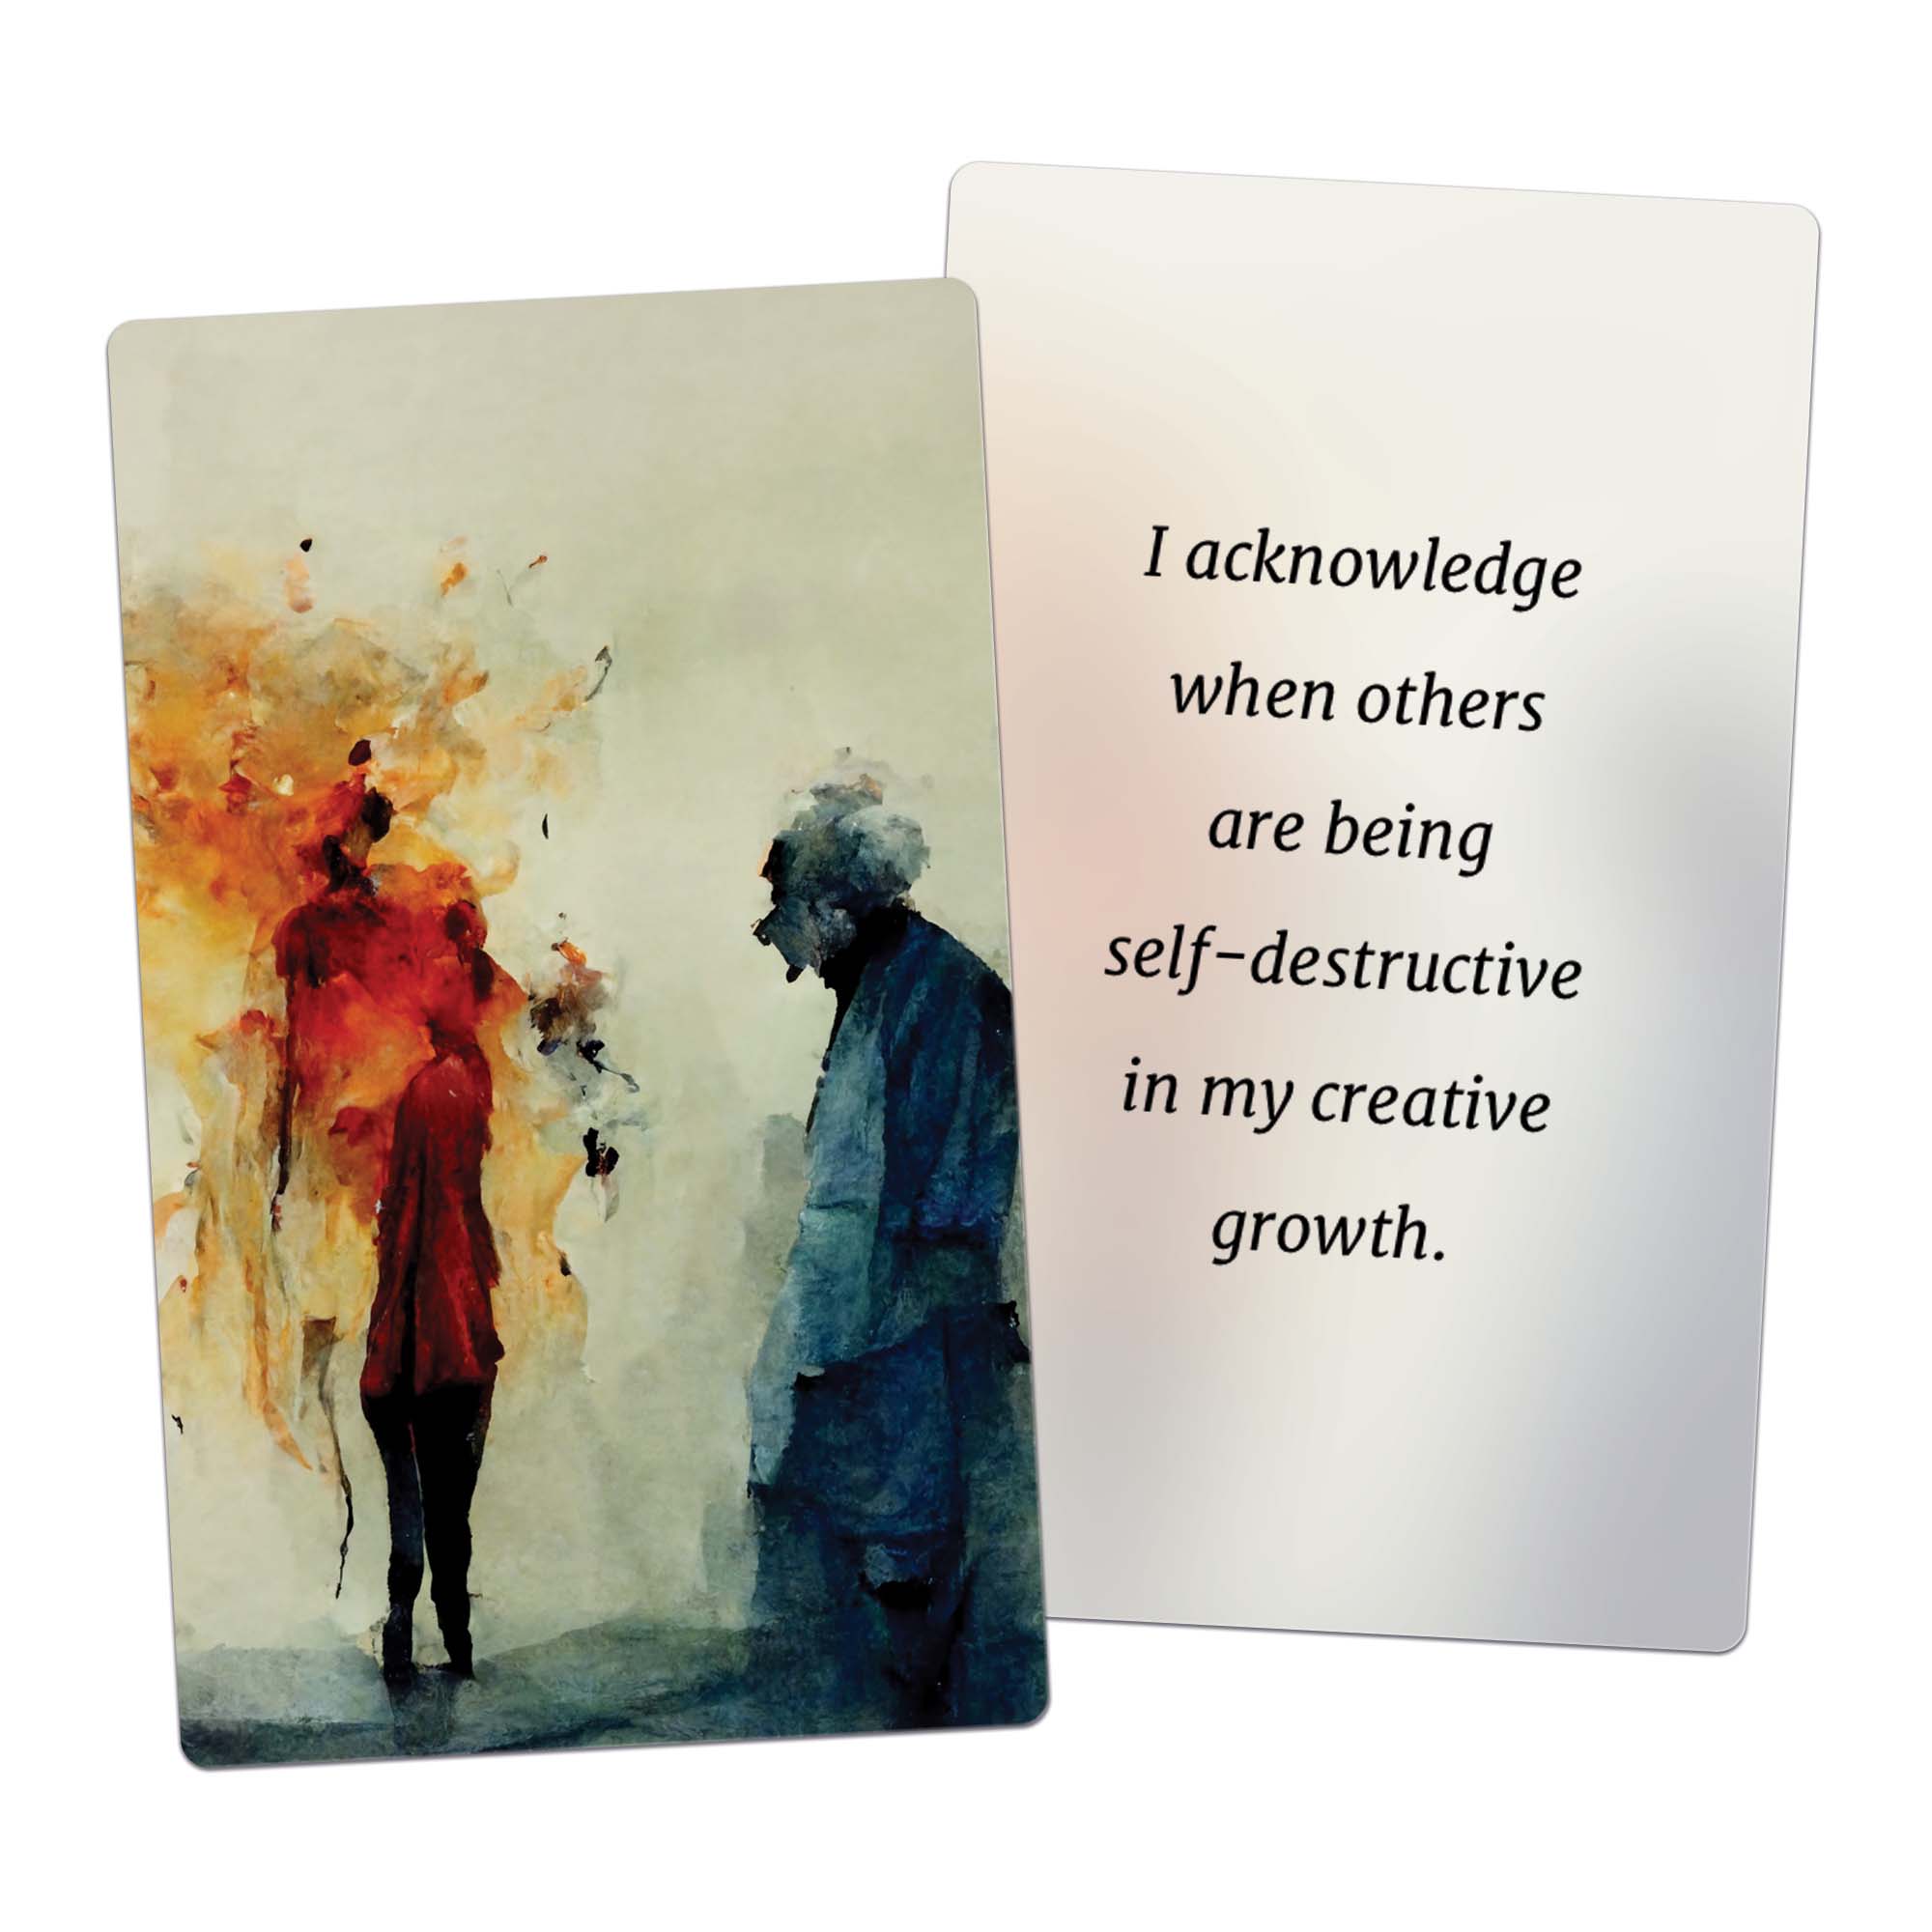 I acknowledge when others are being self-destructive in my creative growth.